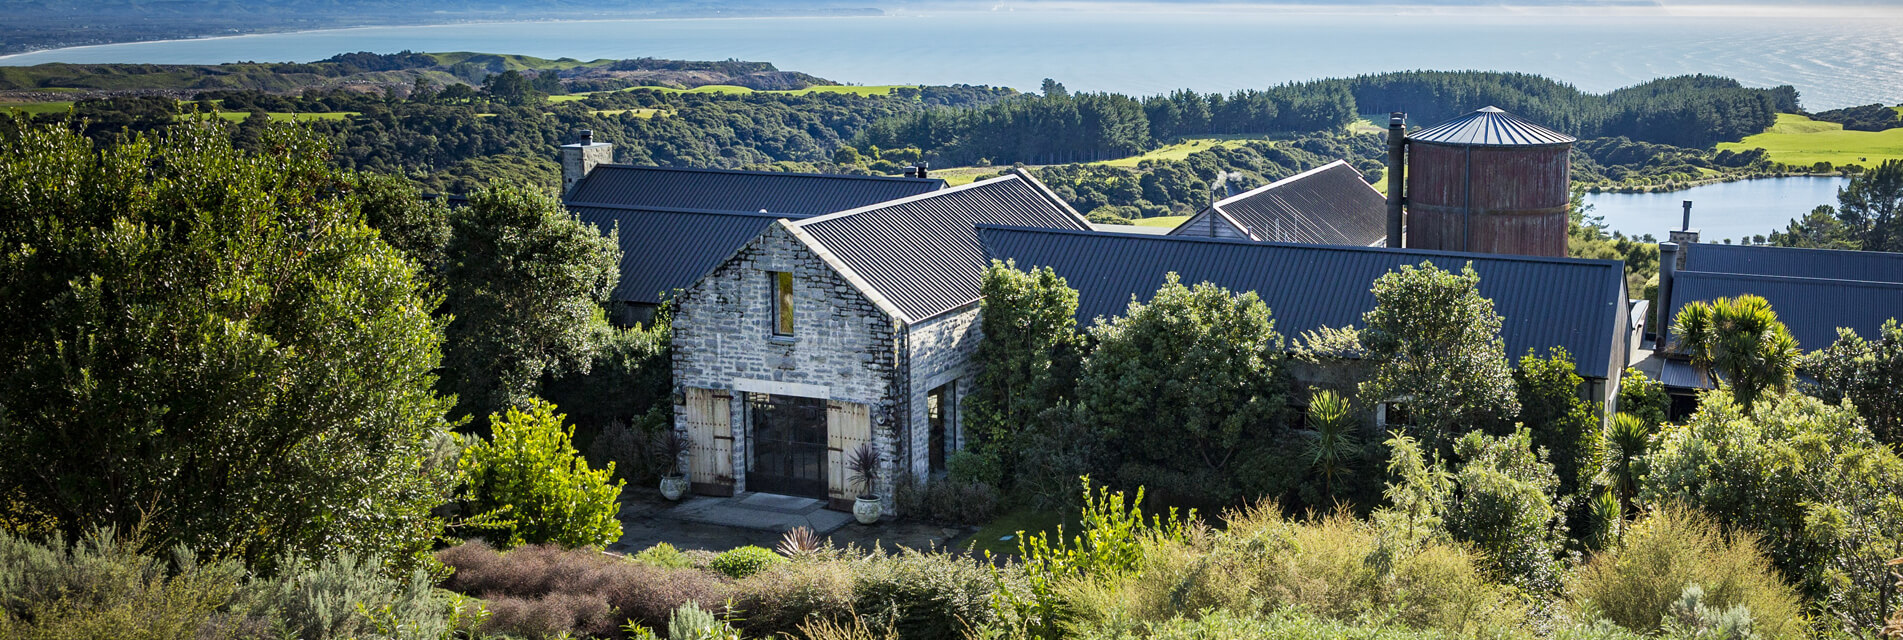 The Farm At Cape Kidnappers Luxury Lodges Of New Zealand